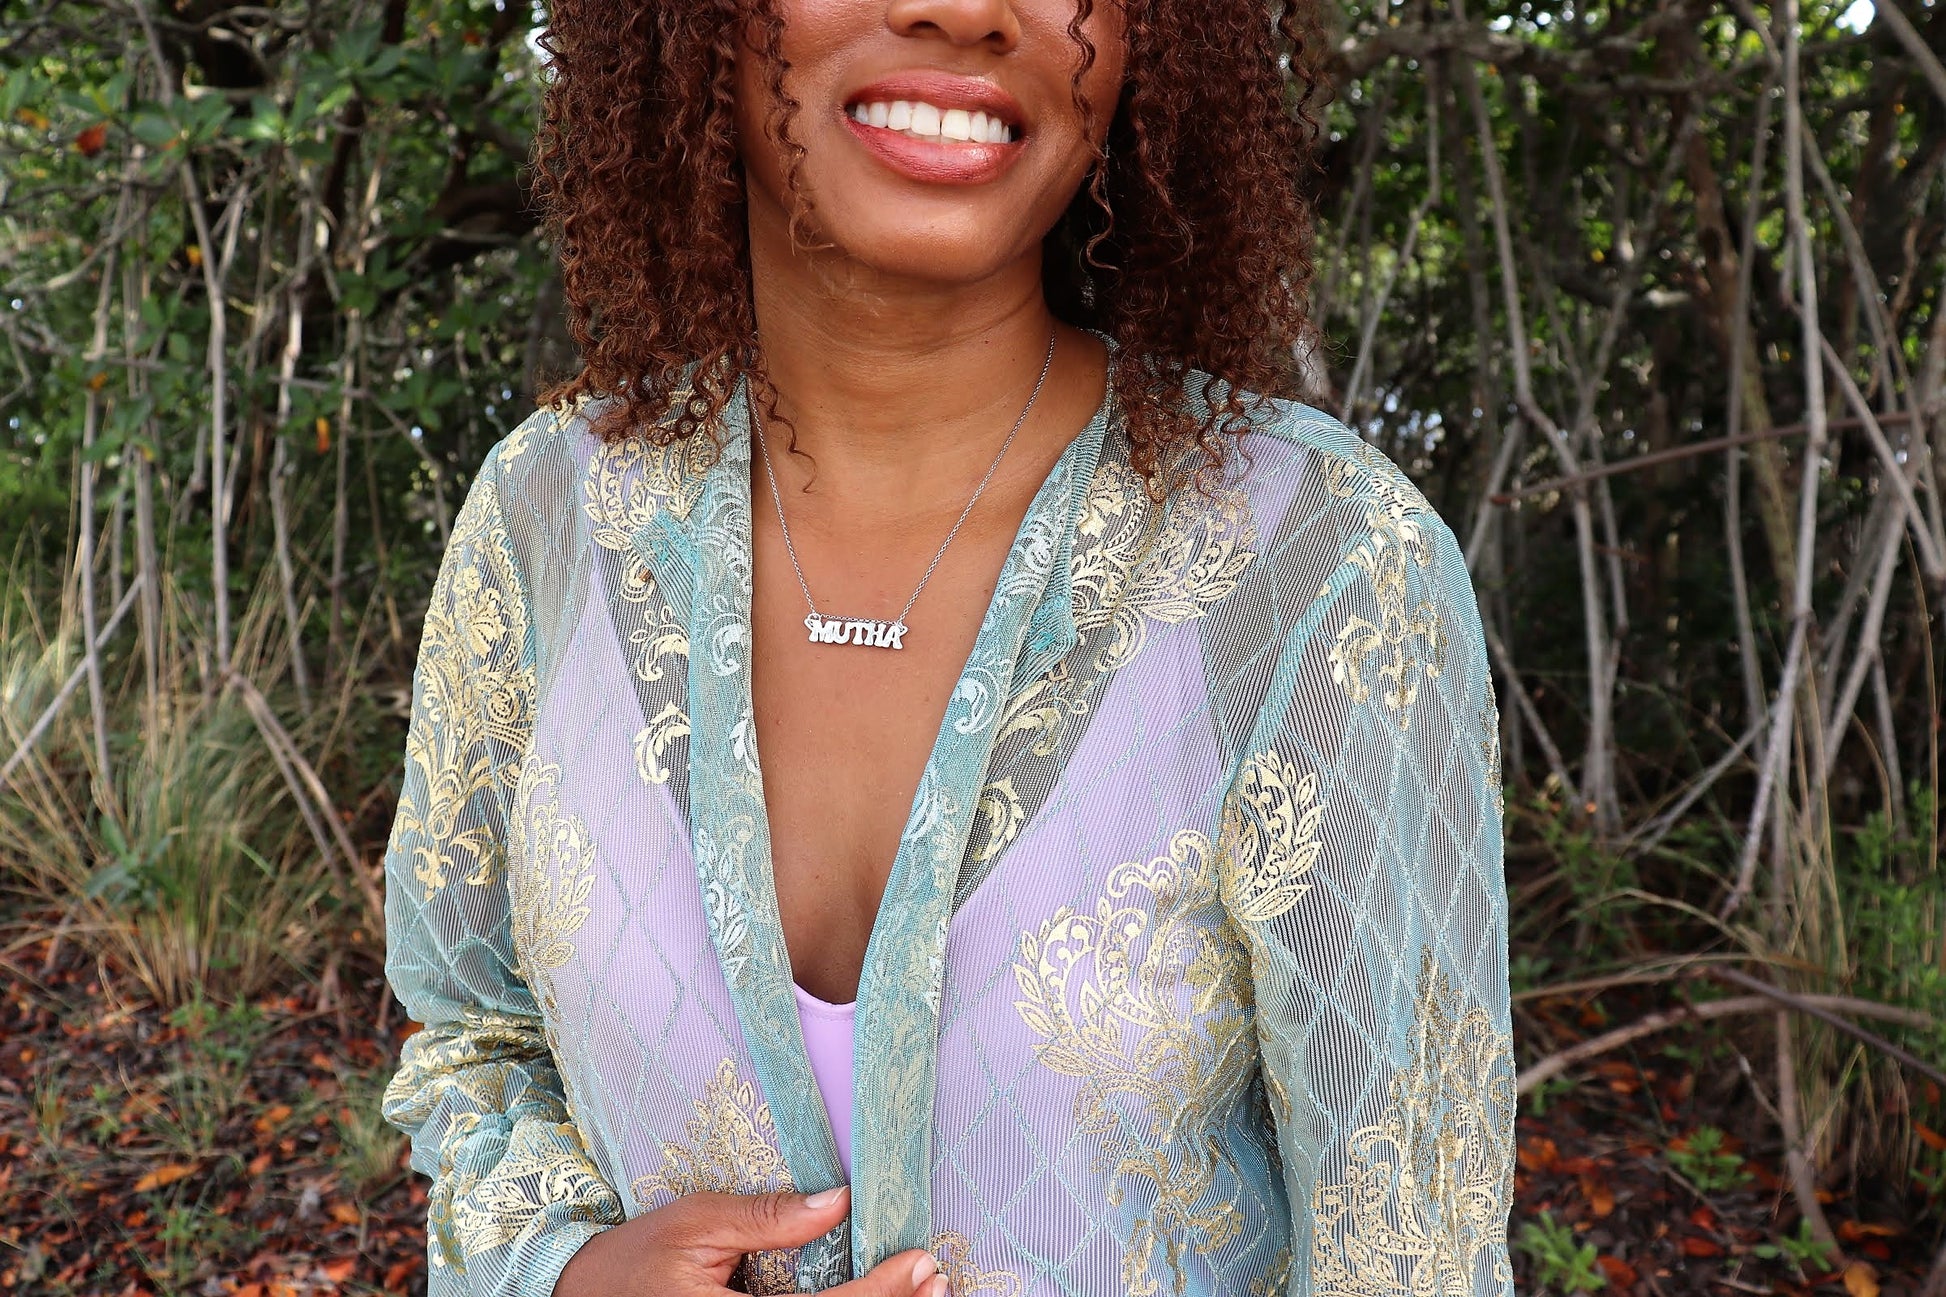 black woman in blue robe and purple tank top smiling in forest wearing mutha necklace